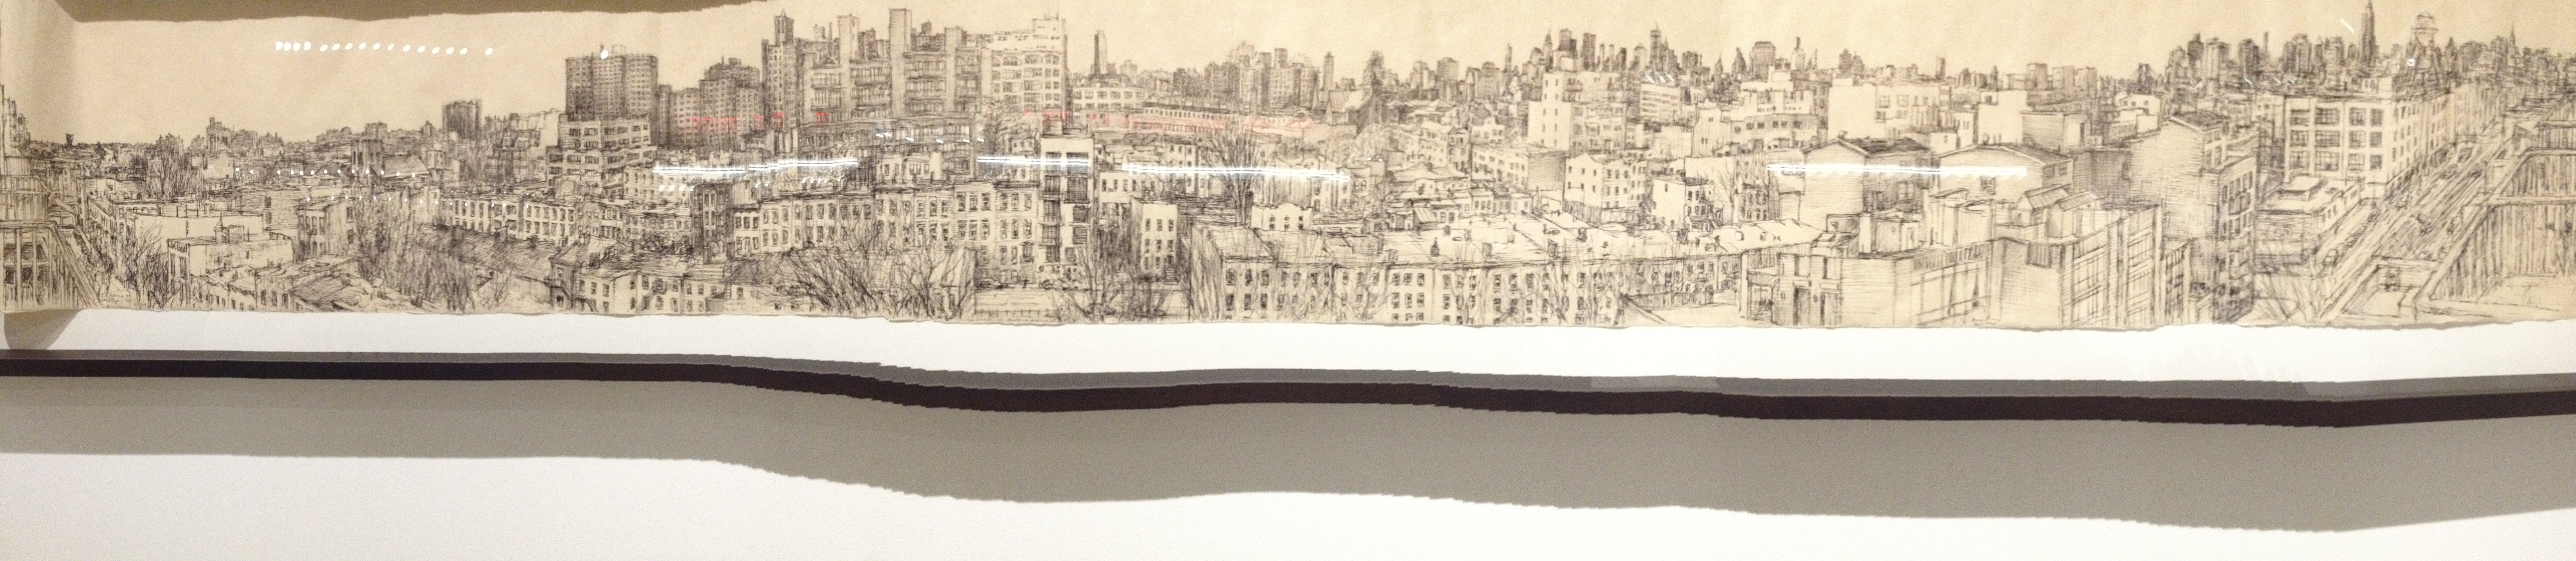 Simonetta Moro, A room with a view: the Last of Bed-Stuy, 2009, ink on paper